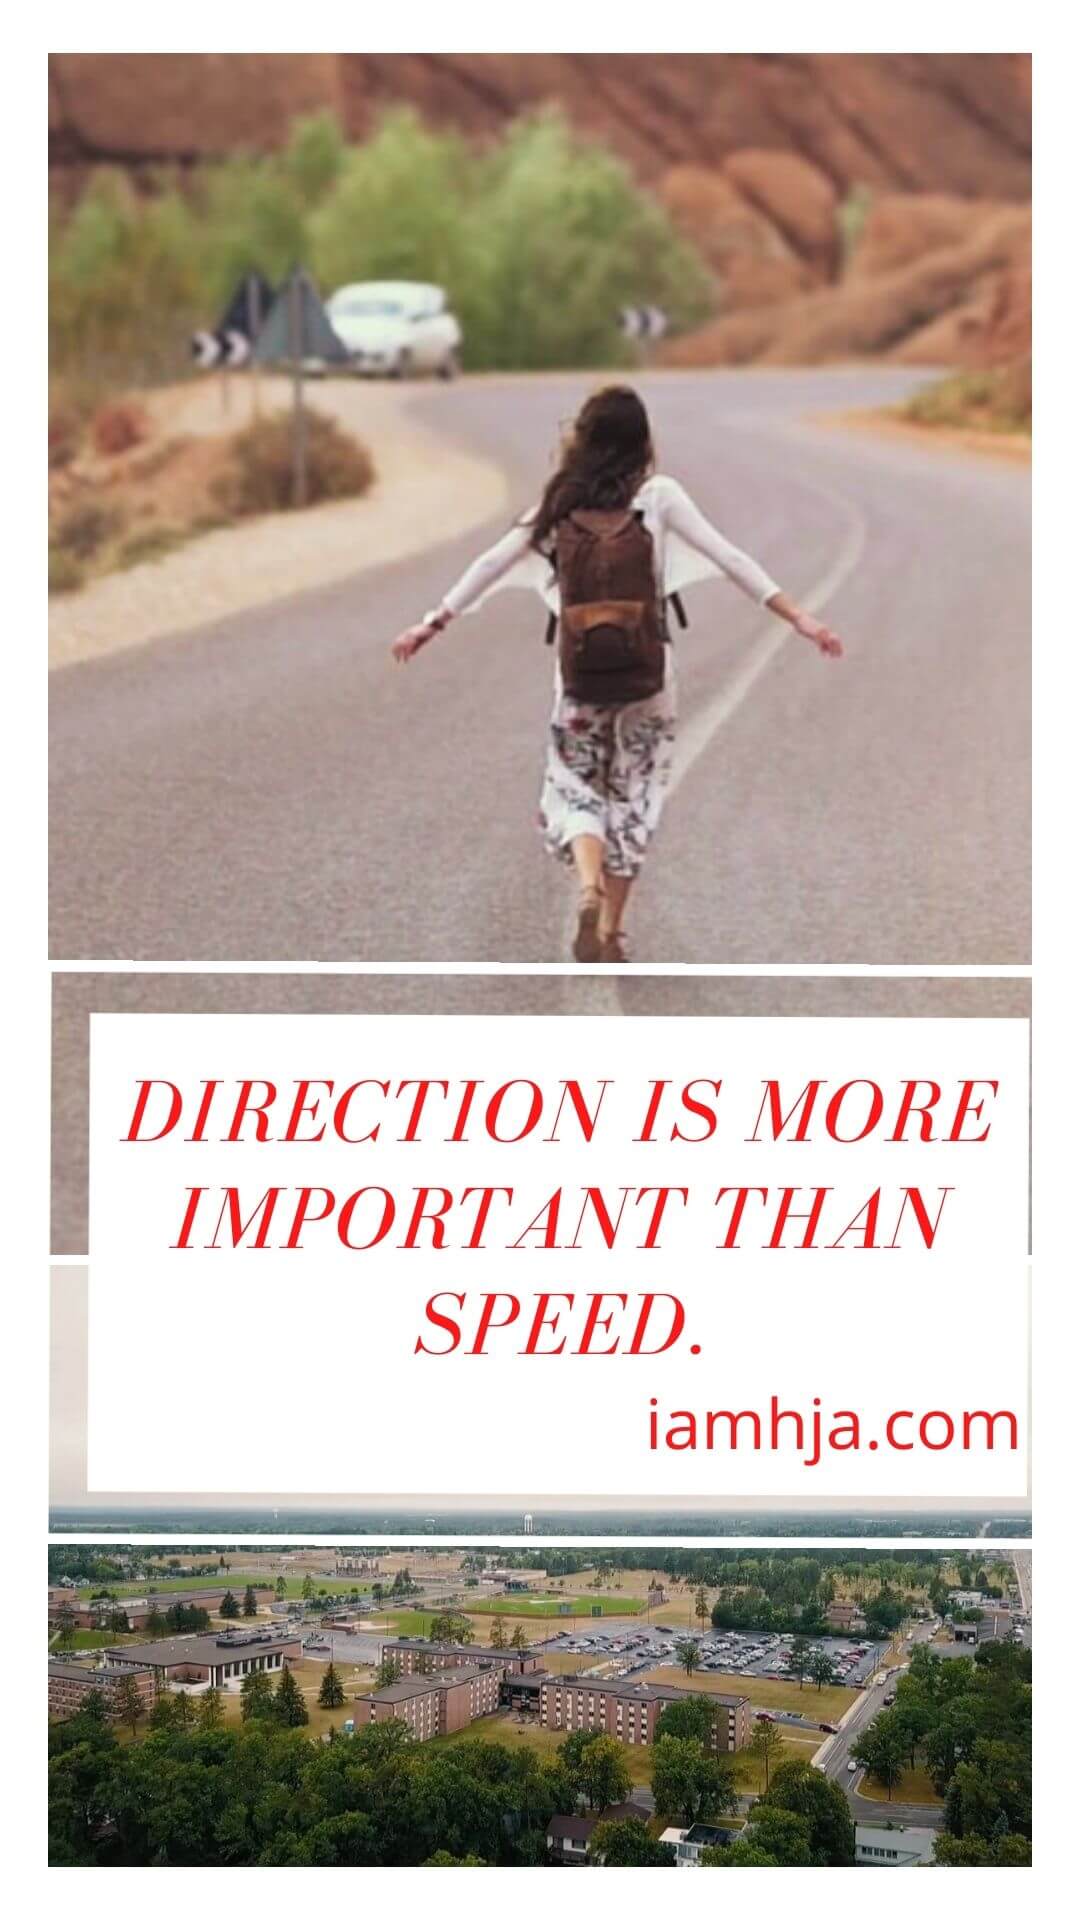 Direction is more important than speed.